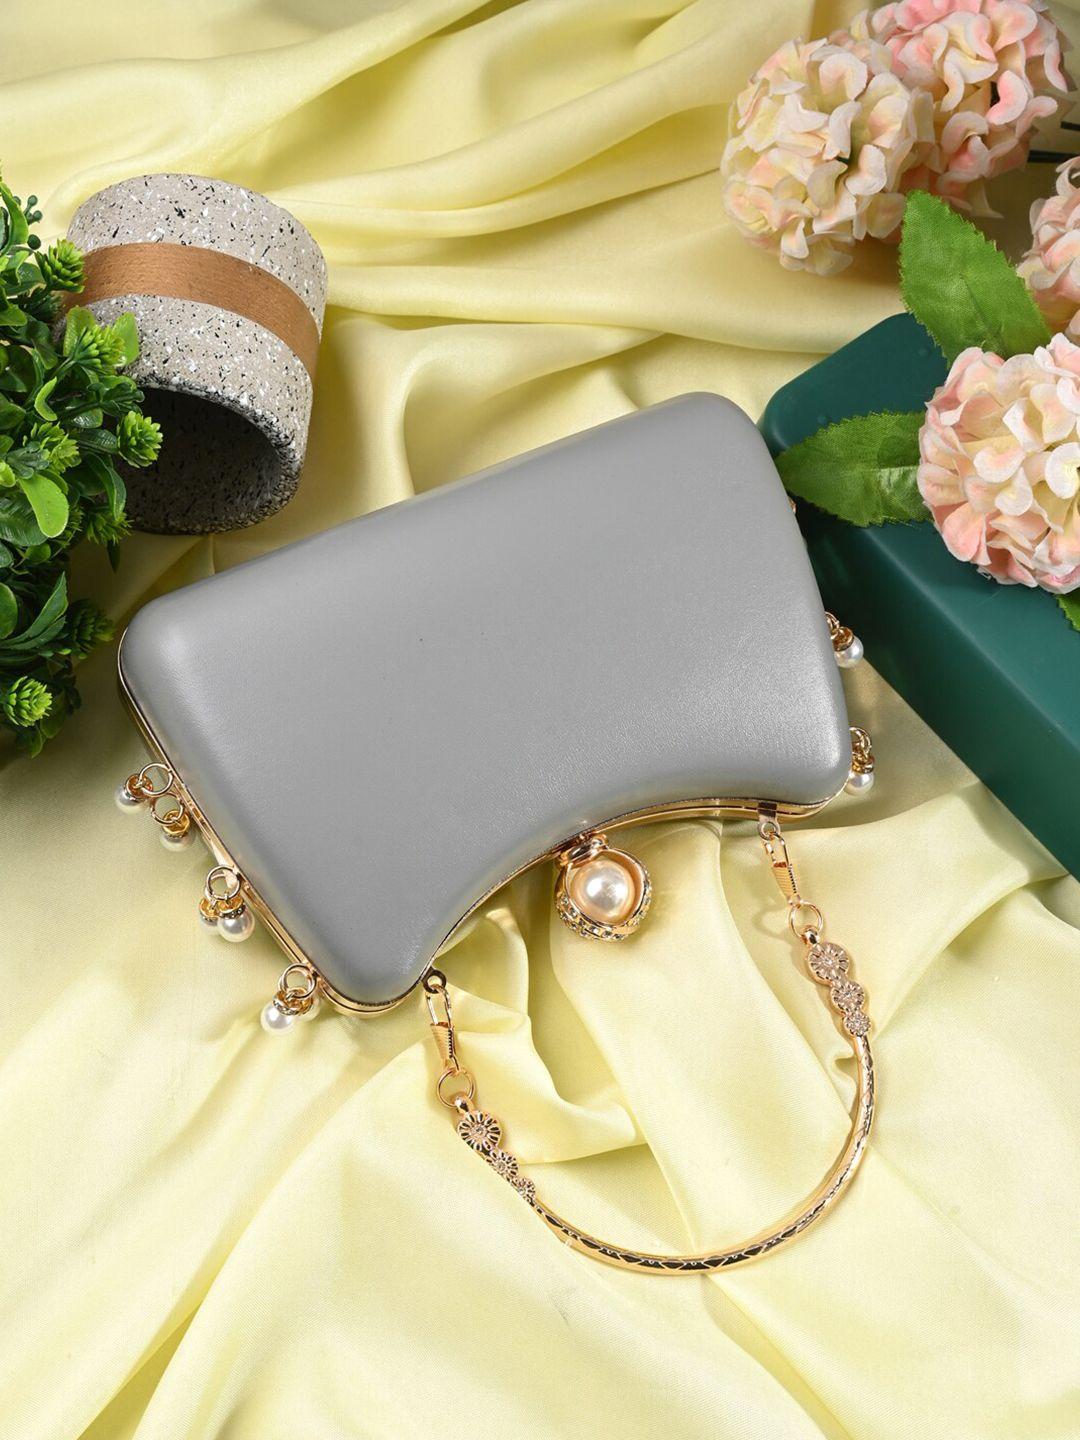 toobacraft grey & gold-toned embellished box clutch